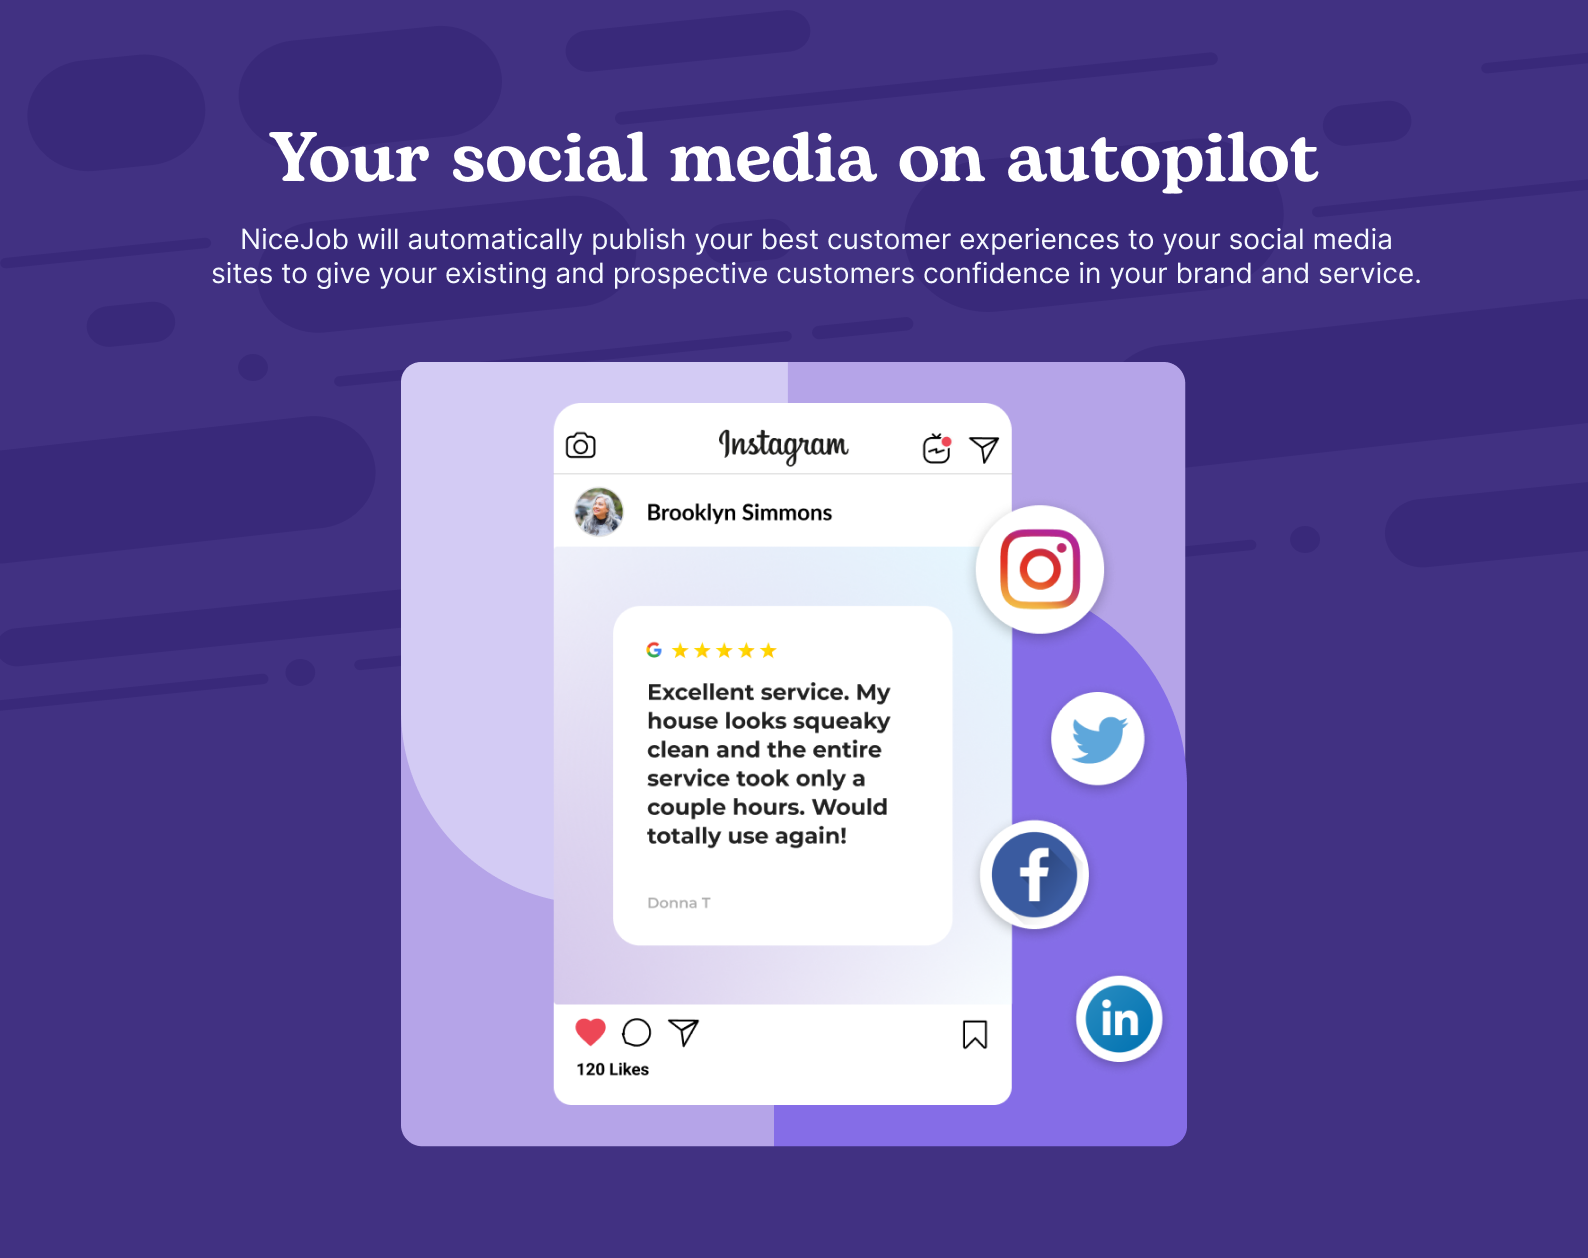 Share snippets of your reviews on social media to get more engagement.